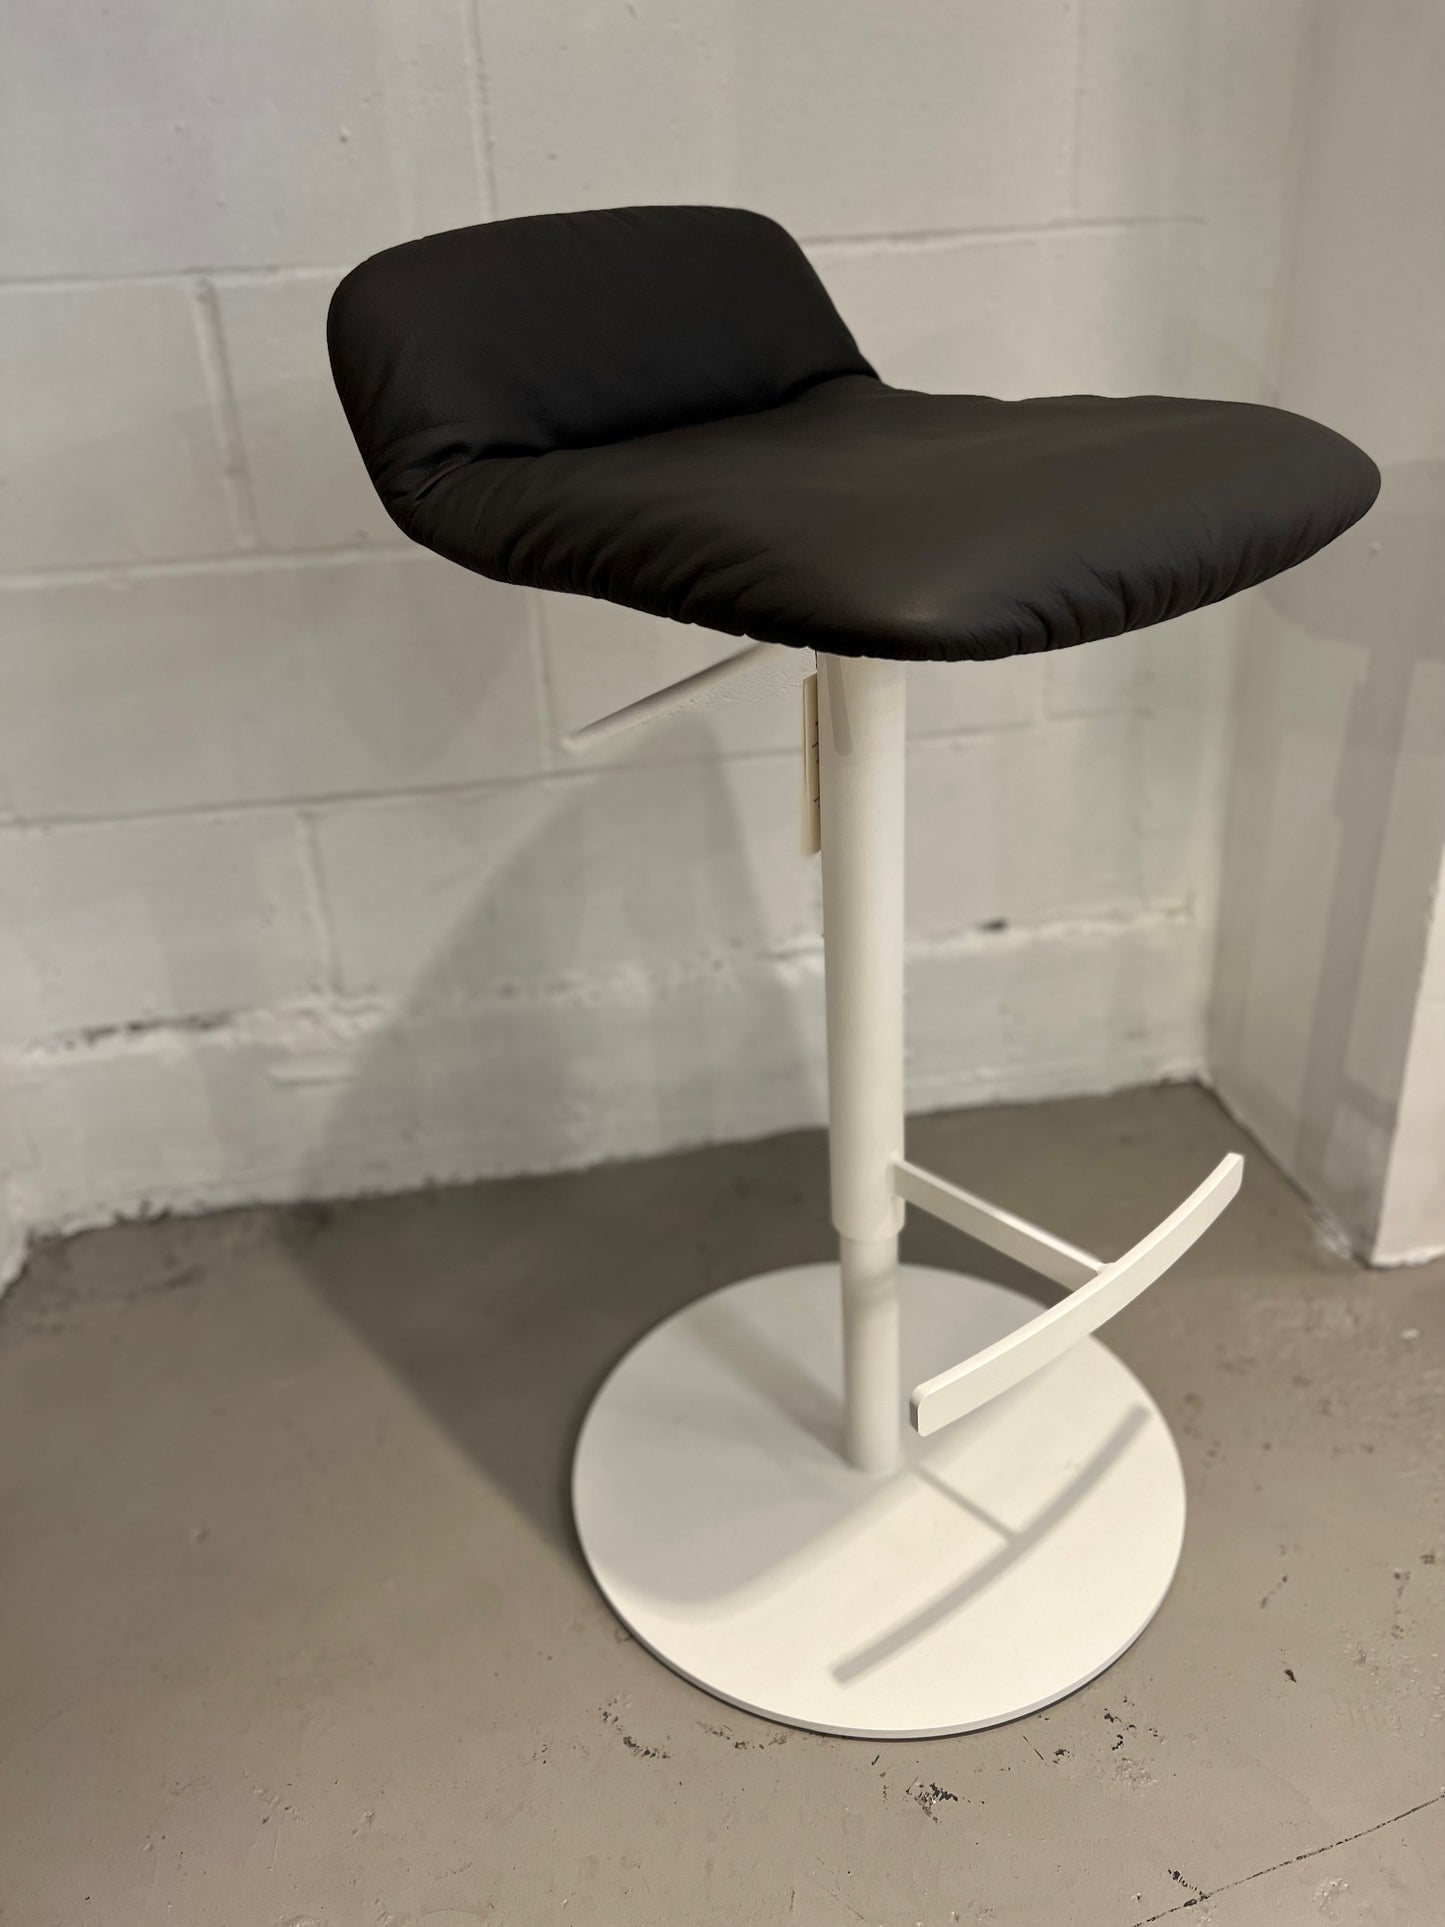 Leya Low Back Stool in anthracite leather and adjustable height column base in white